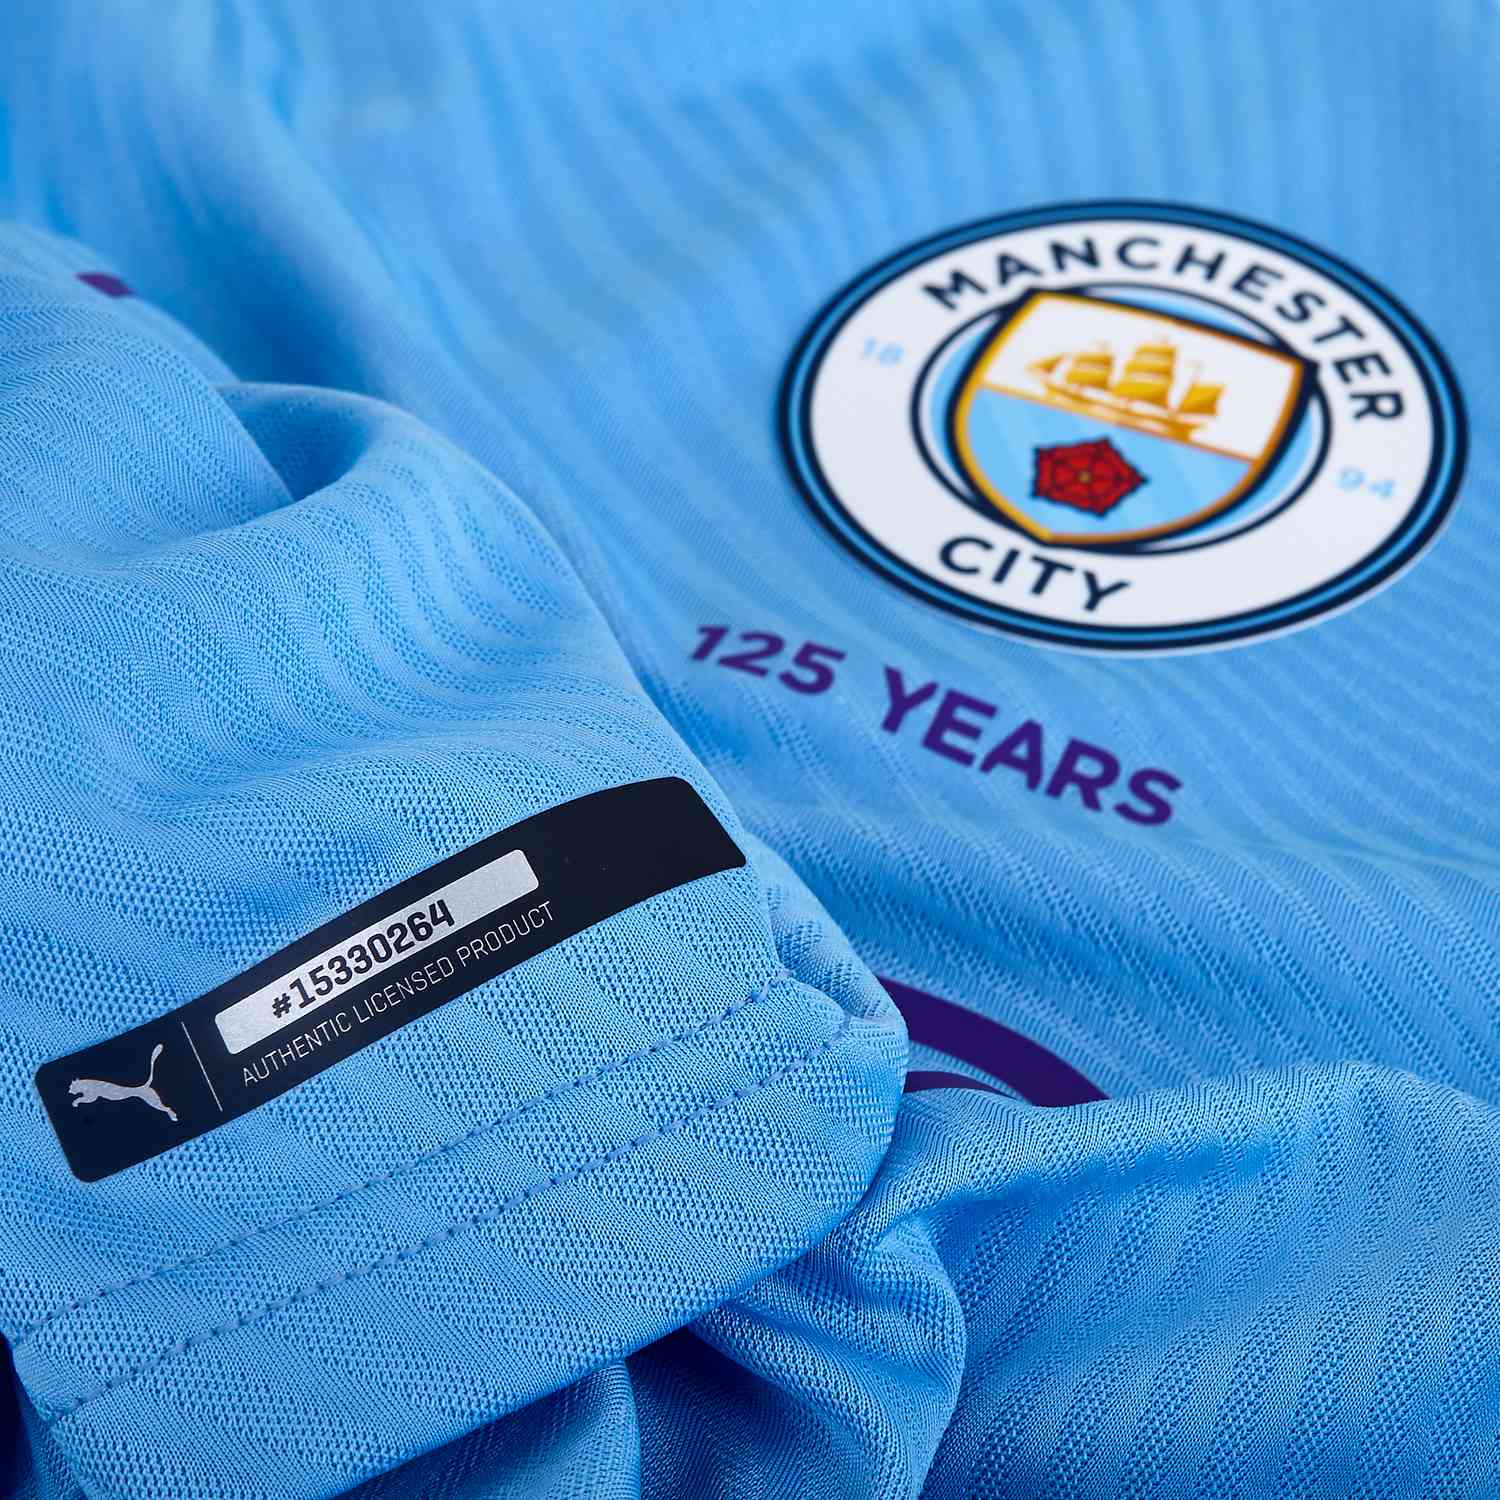 manchester city authentic jersey